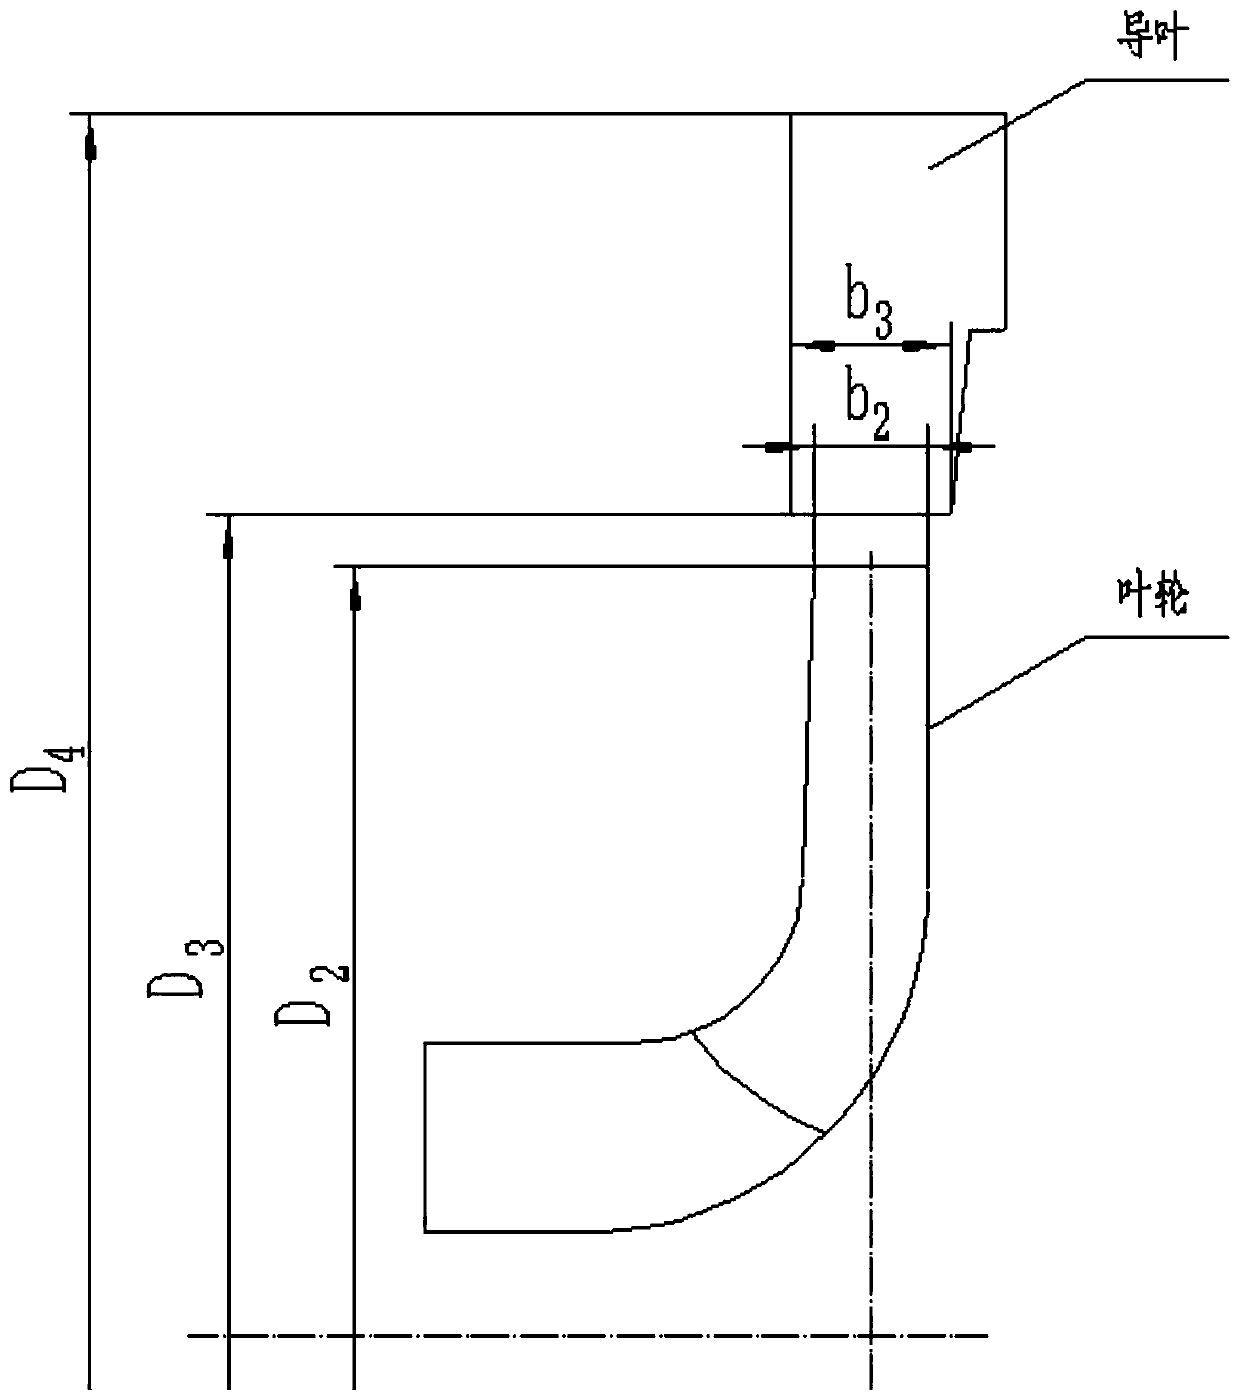 A hydraulic design method for reducing a multi-stage pump lift curve hump